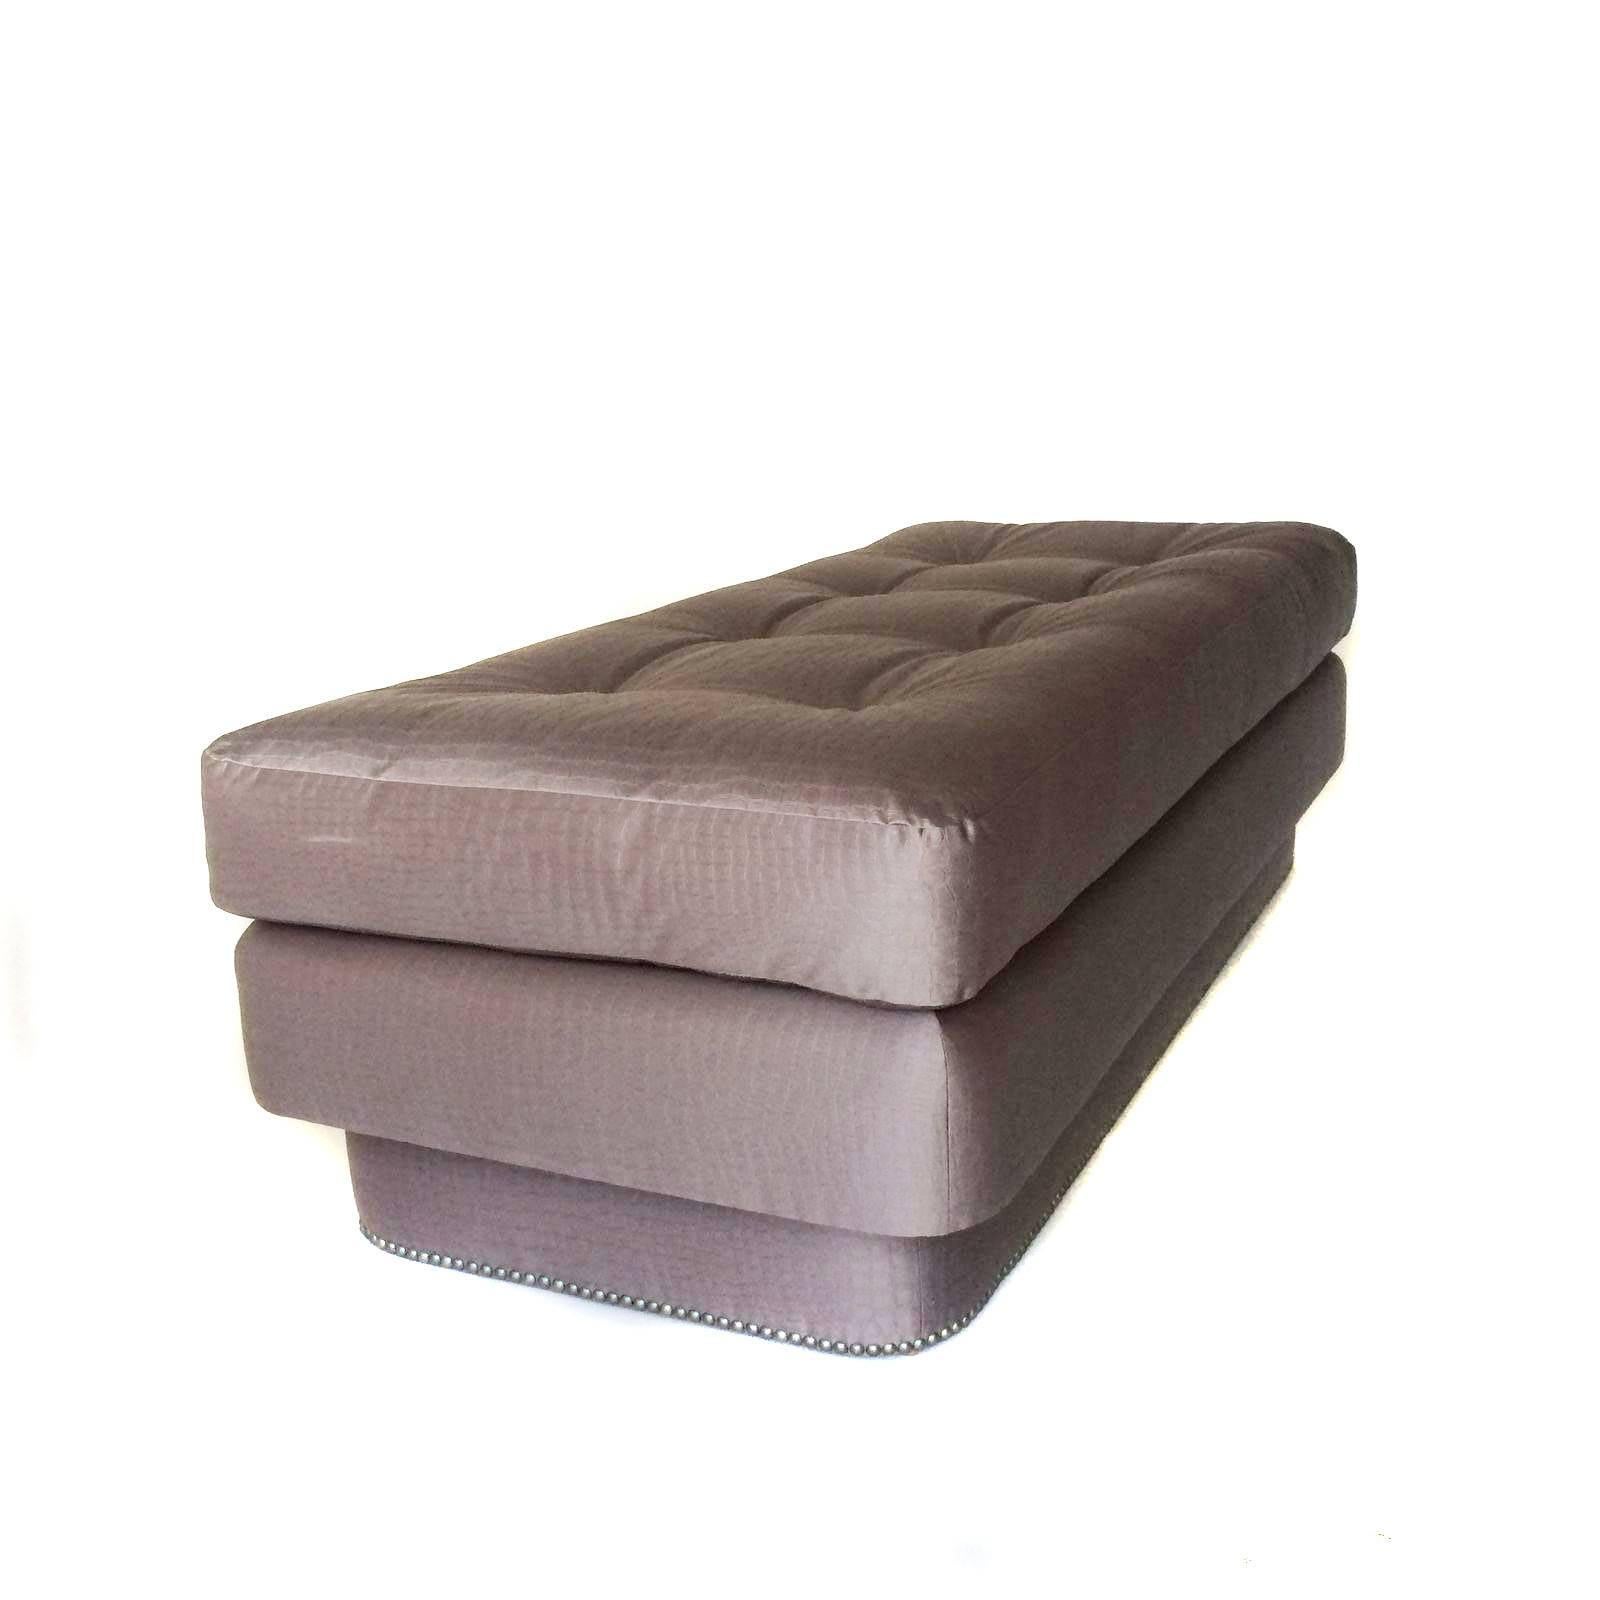 This beautiful, glamorous 1970s ottoman or bench has been upholstered in a contemporary faux shimmering croc fabric complete with pewter nailheads. What a versatile piece! It can serve as a coffee table, a bench at the end of an elegant bed or a